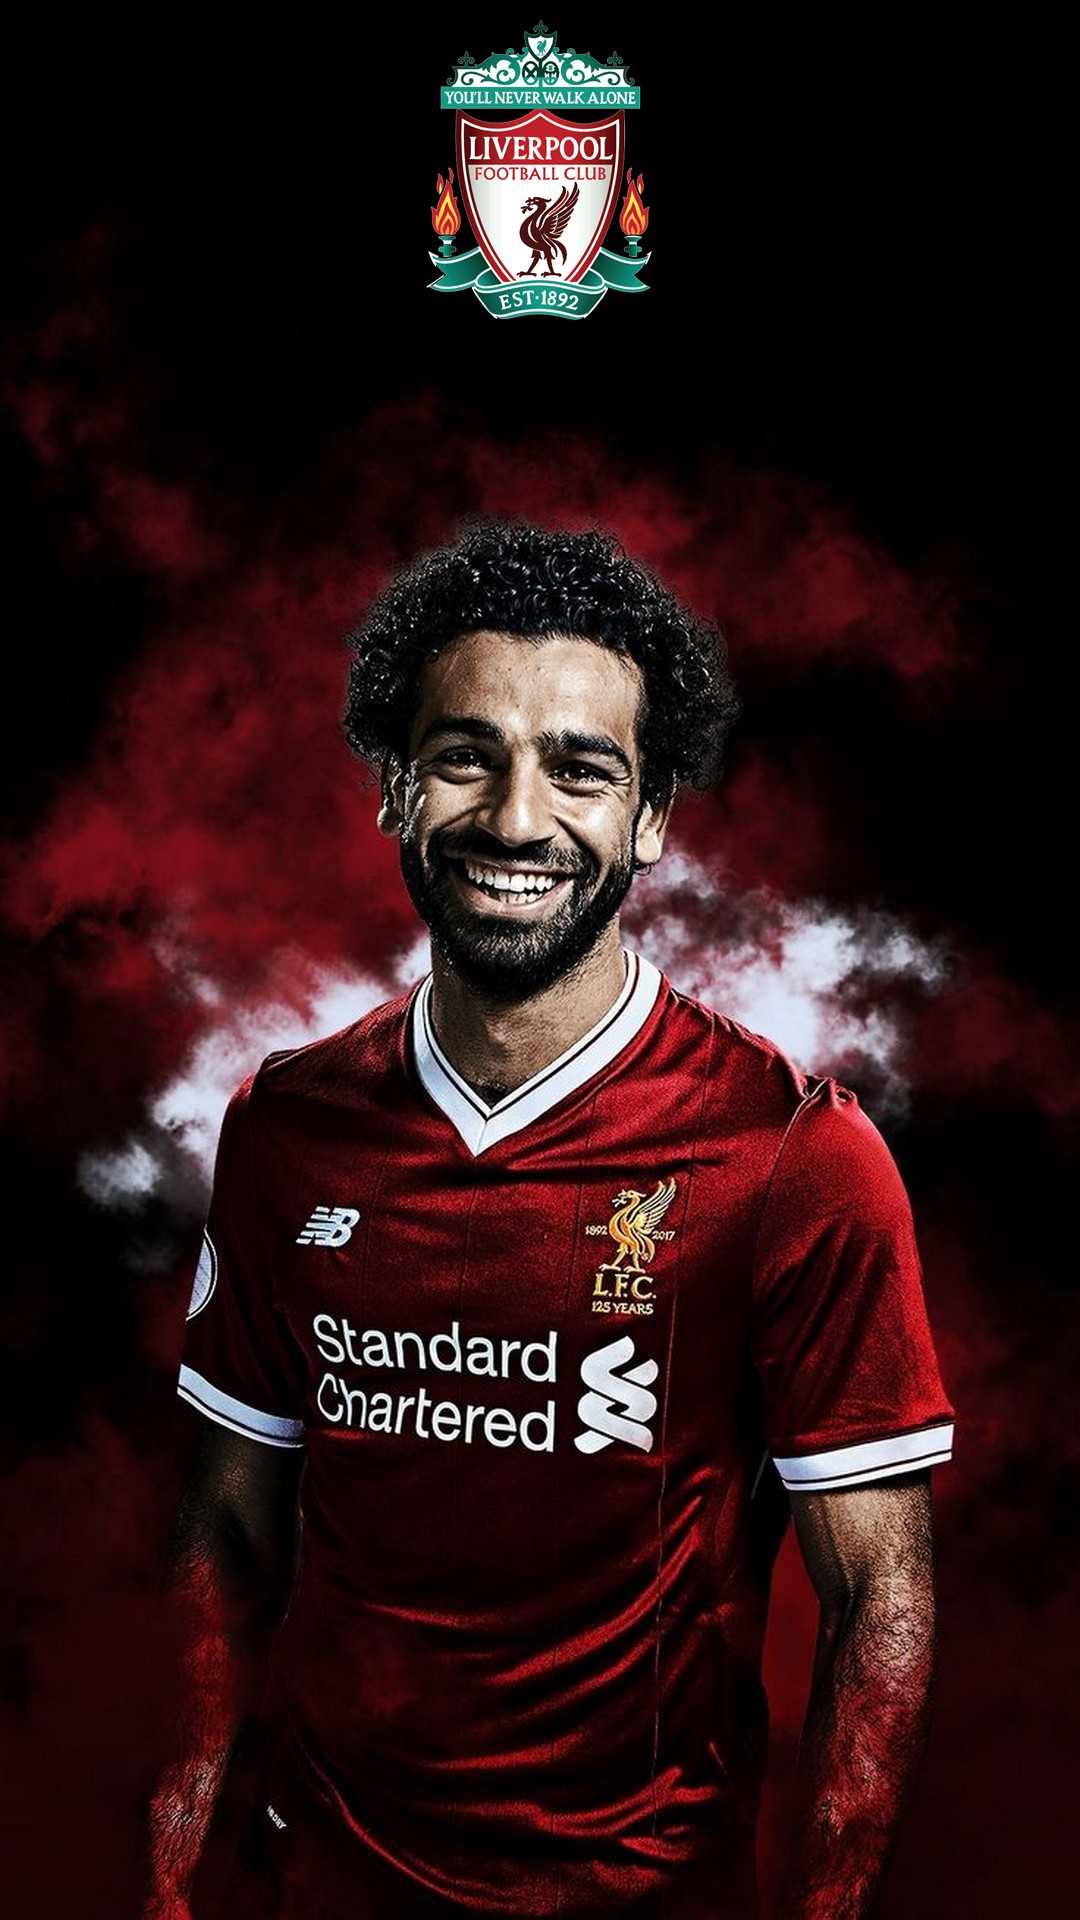 Mo Salah iPhone Wallpaper with image resolution 1080x1920 pixel. You can make this wallpaper for your iPhone 5, 6, 7, 8, X backgrounds, Mobile Screensaver, or iPad Lock Screen